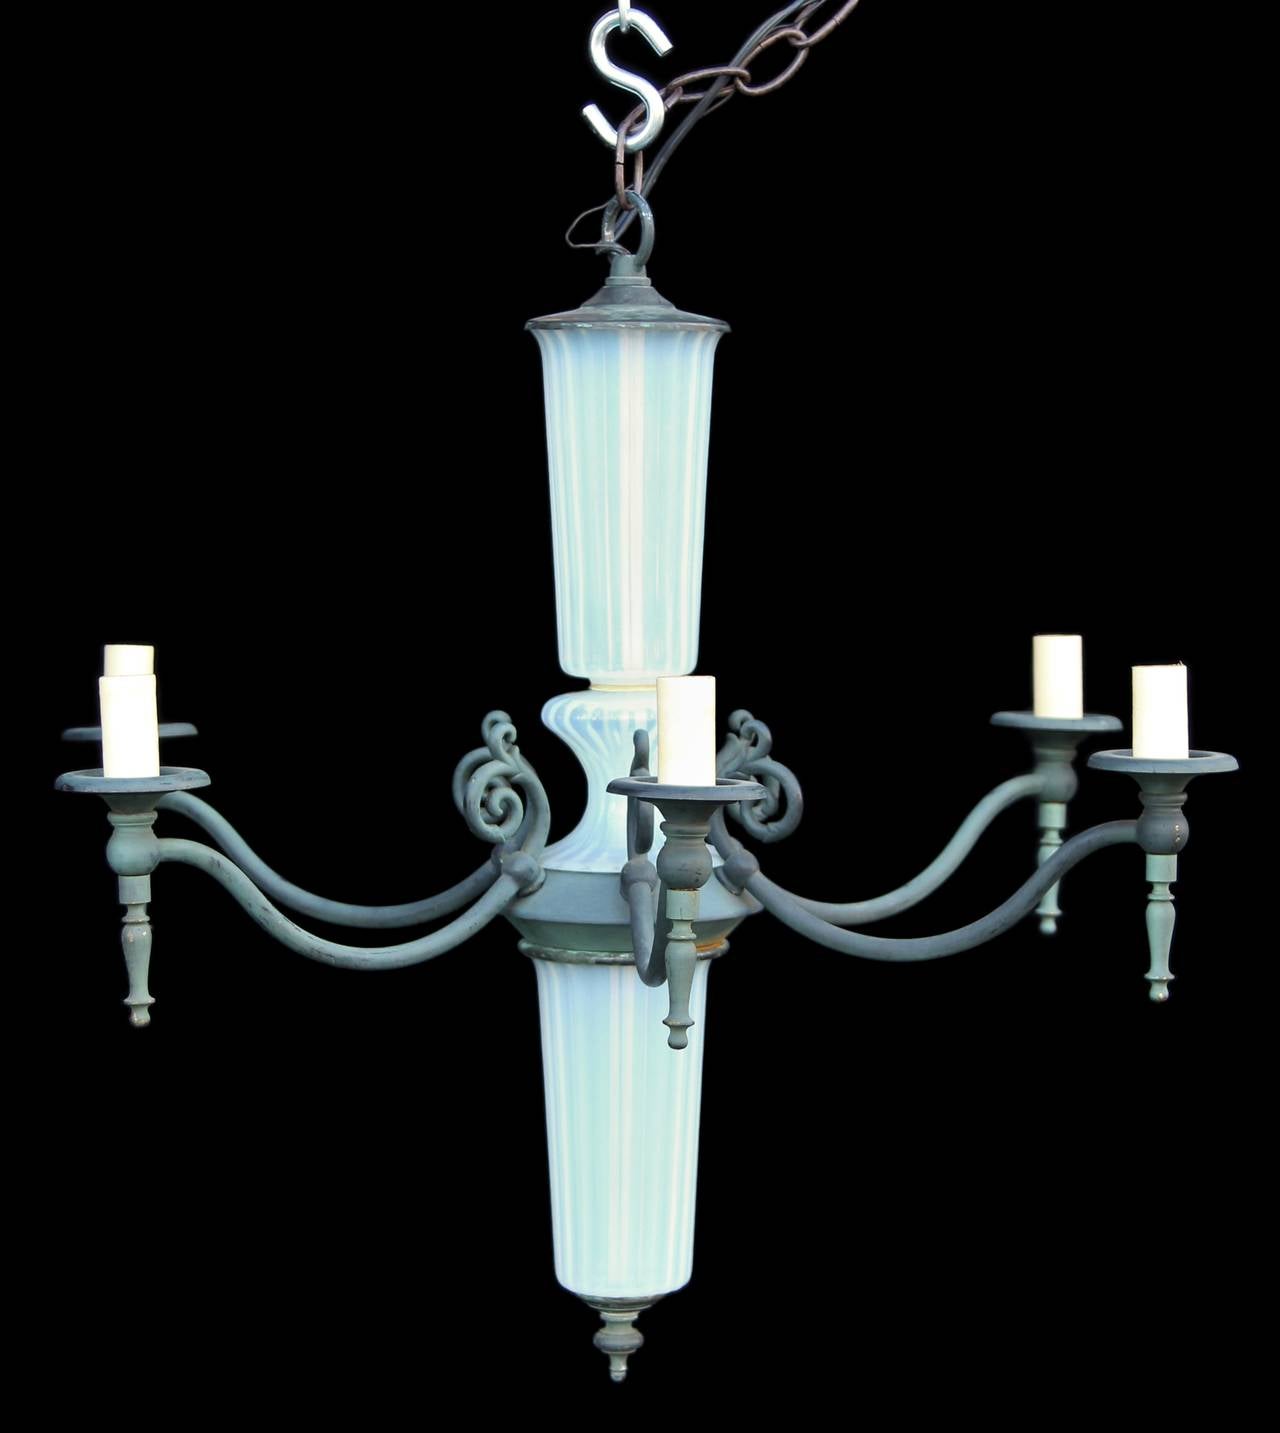 Neoclassical 1940s French Opaline Glass Six-Light Chandelier with Verdigris Finish